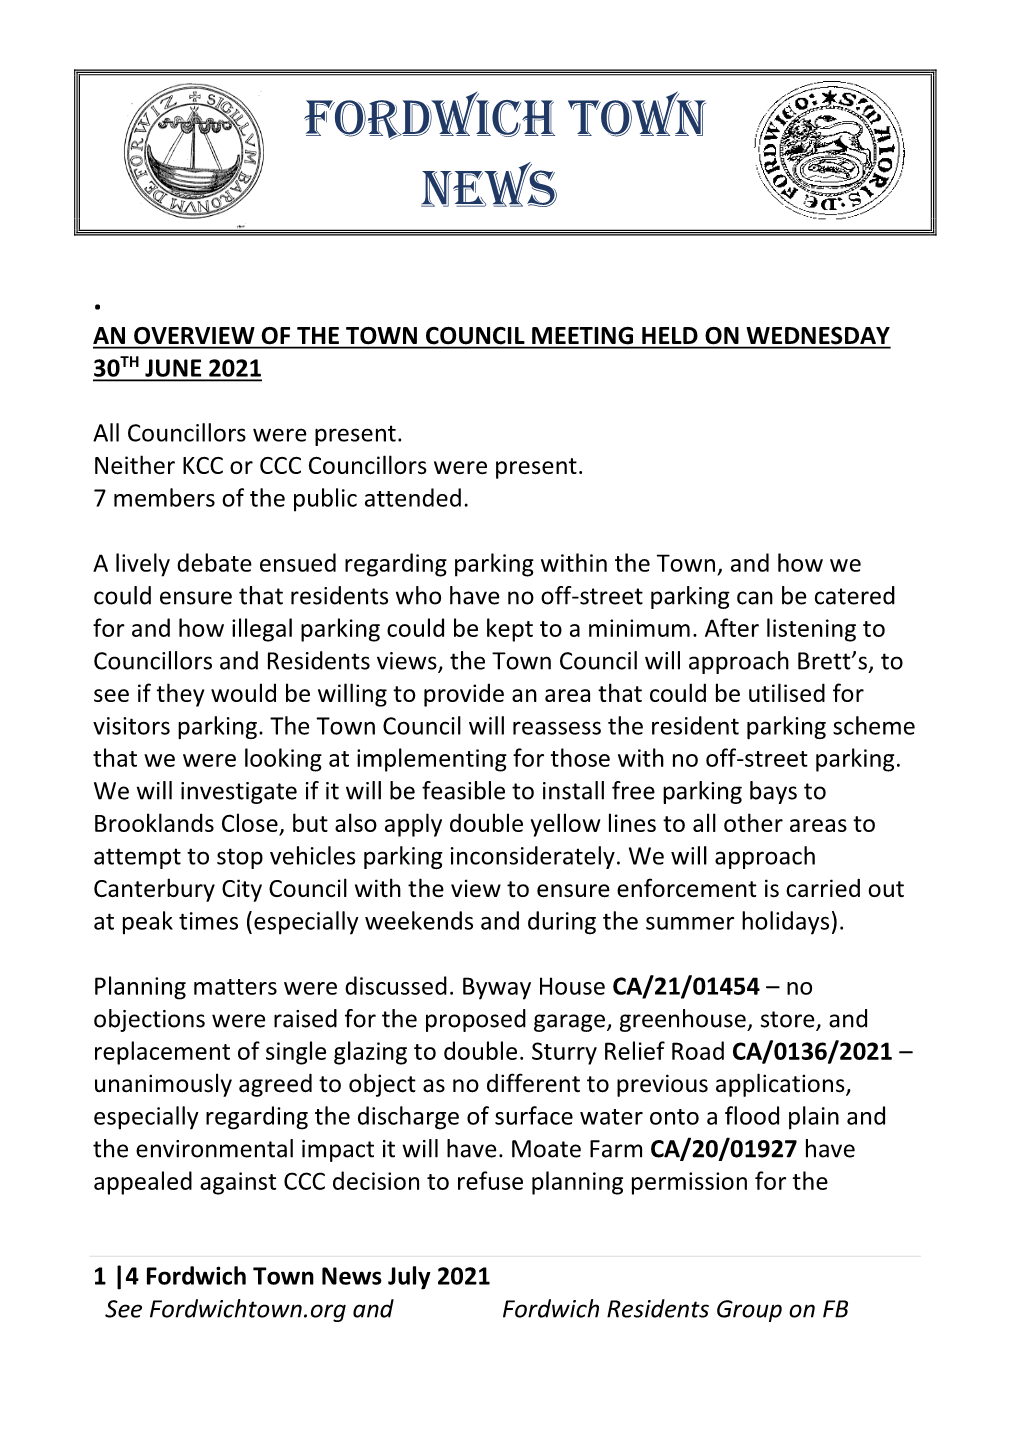 Fordwich Town News July 2021 See Fordwichtown.Org and Fordwich Residents Group on FB